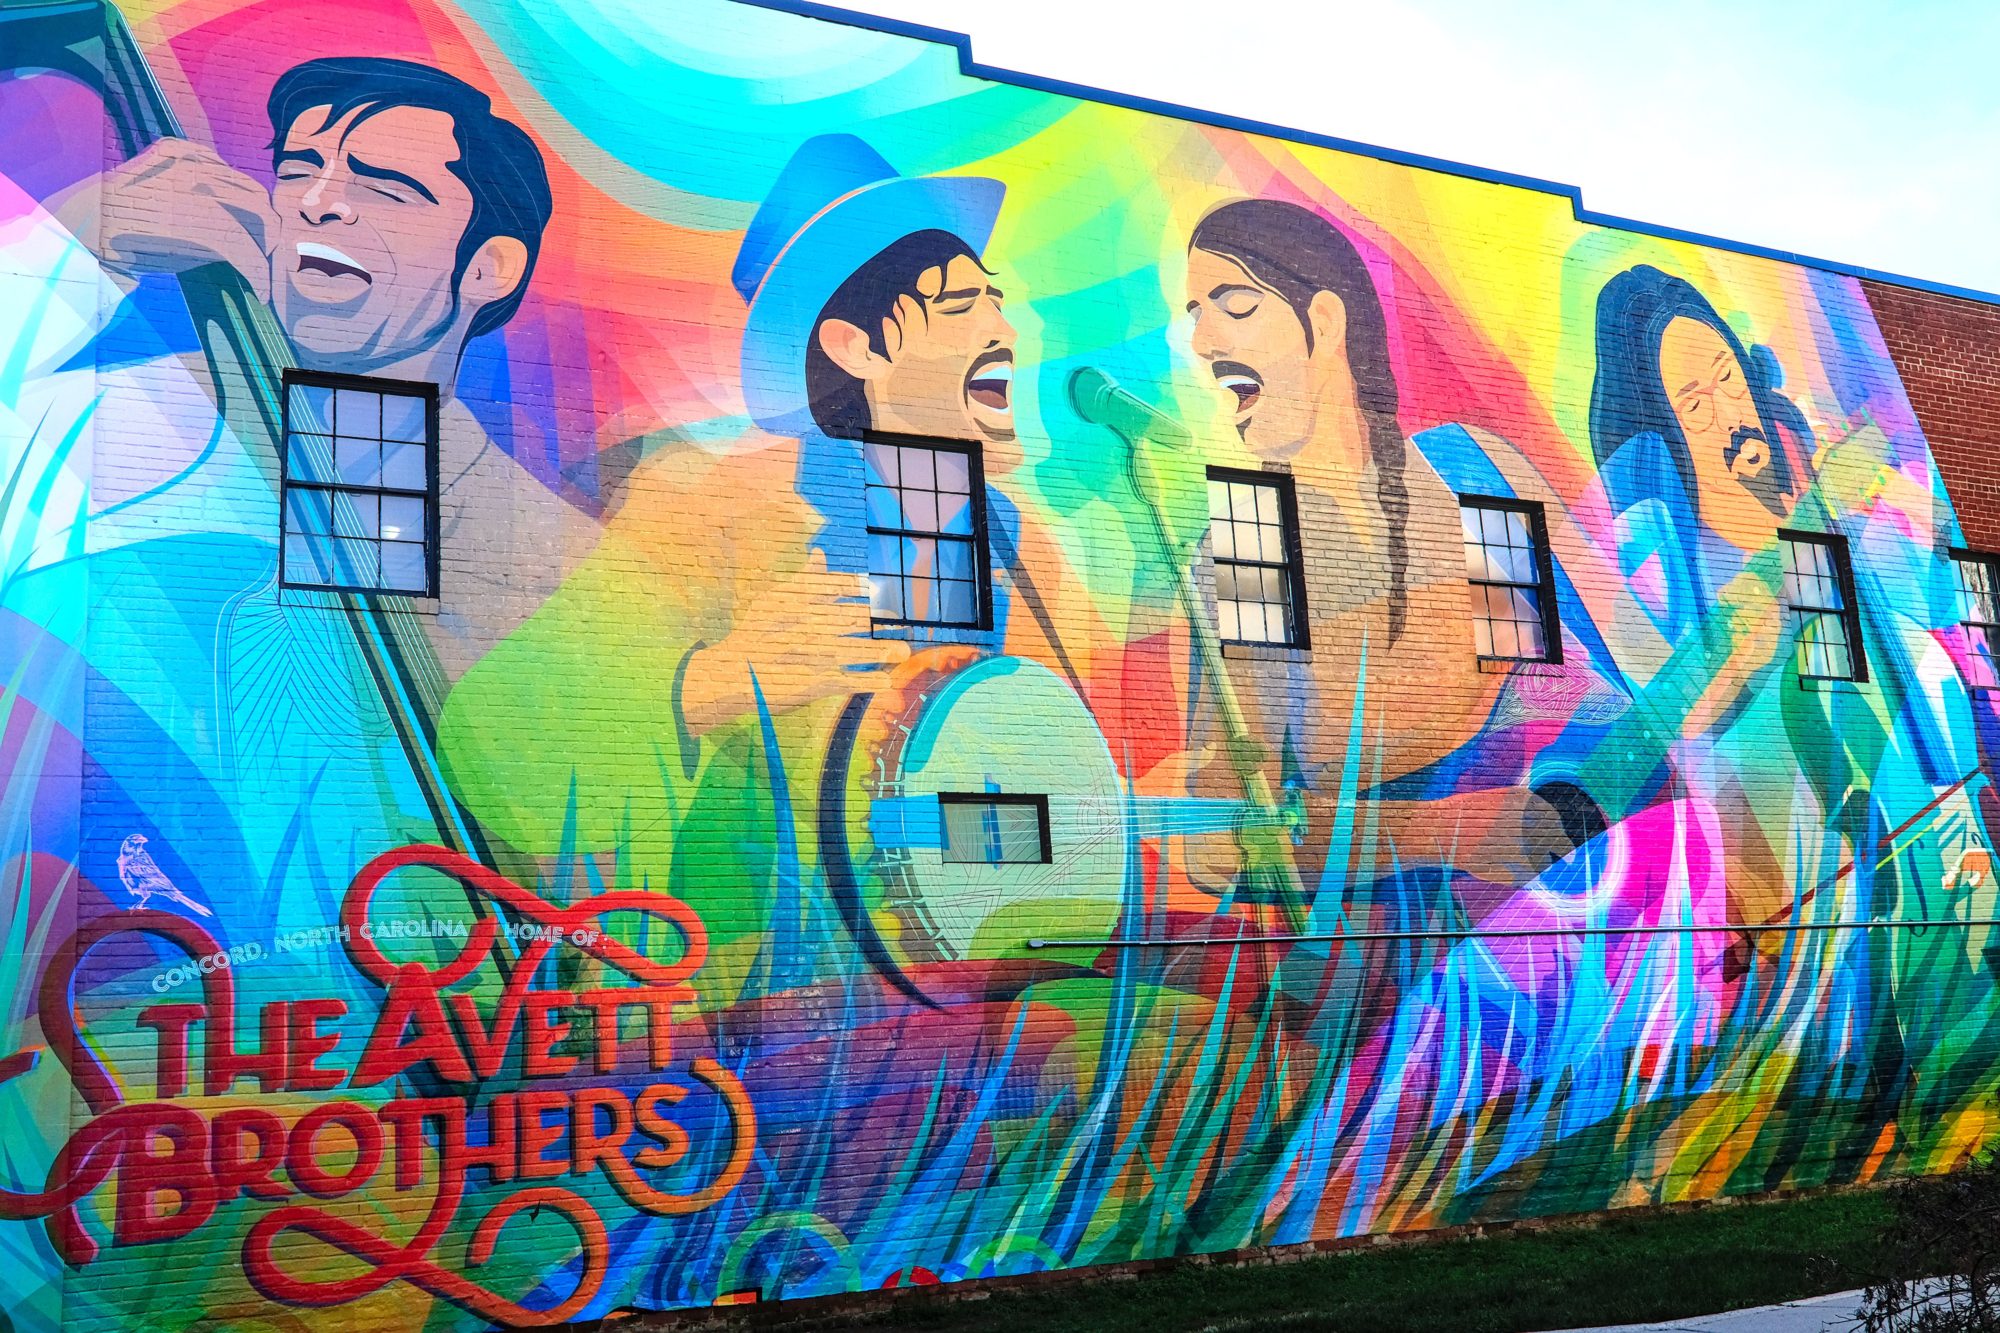 A large, colorful mural of The Avett Brothers in Concord